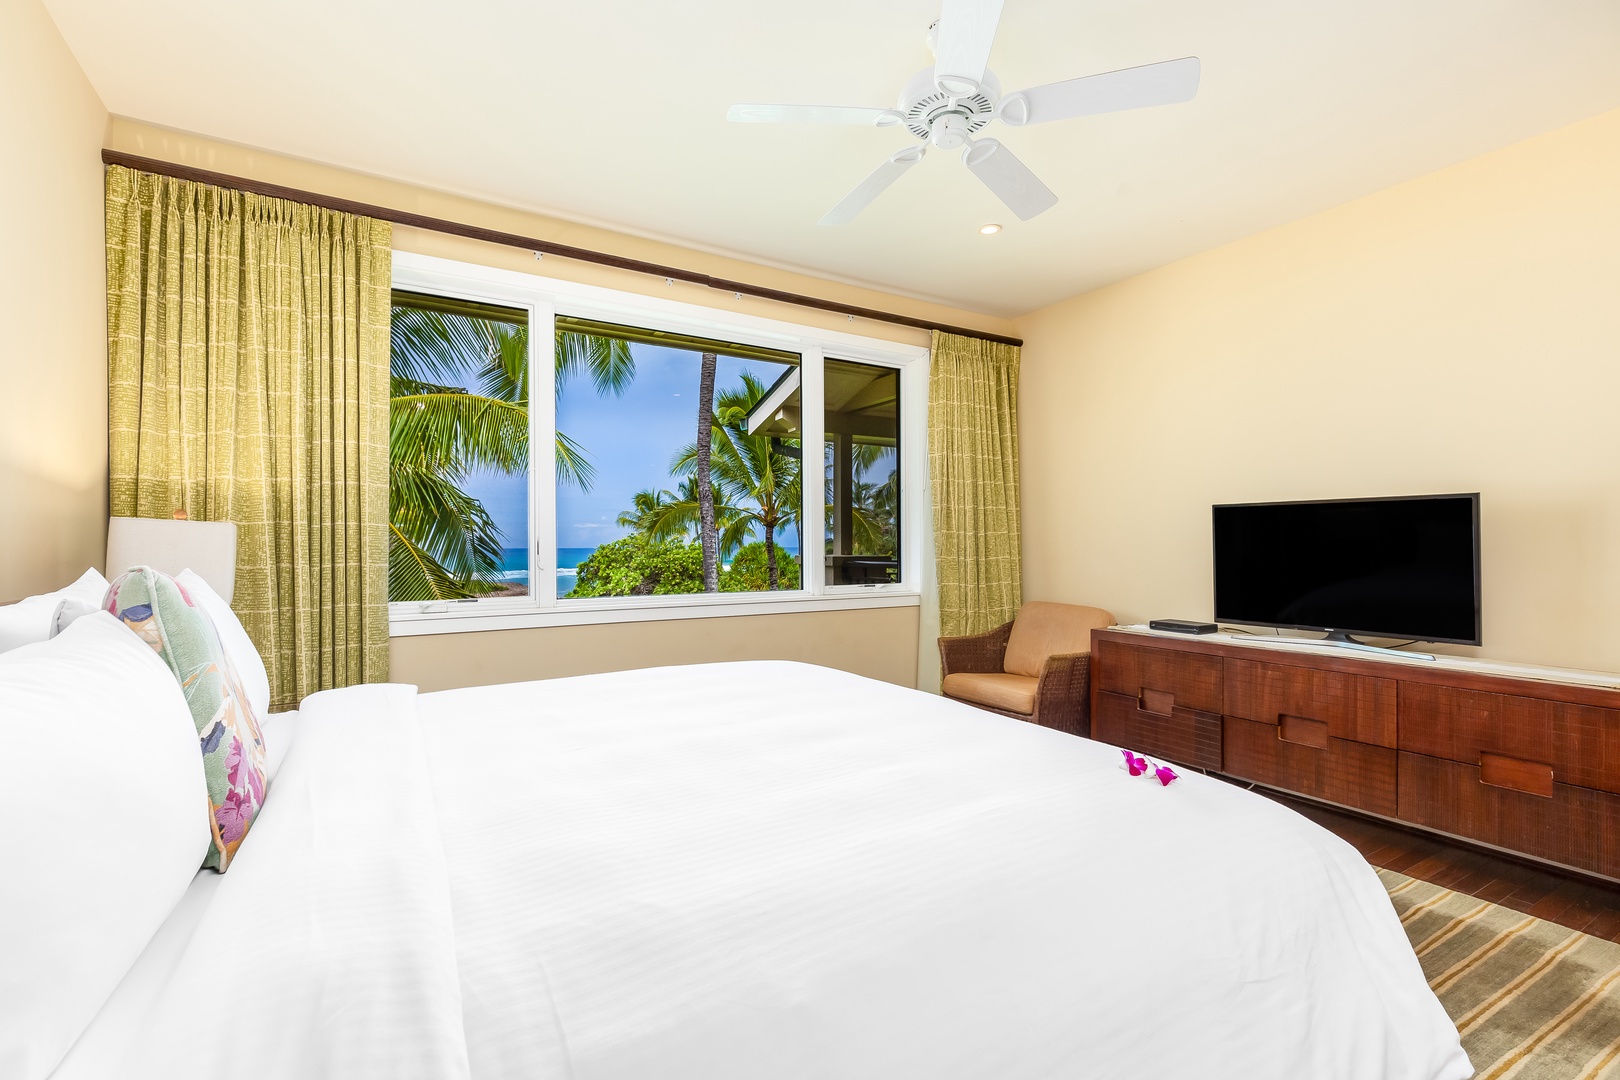 Kahuku Vacation Rentals, Turtle Bay Villas 301 - HD Smart TVs are available in all four bedrooms